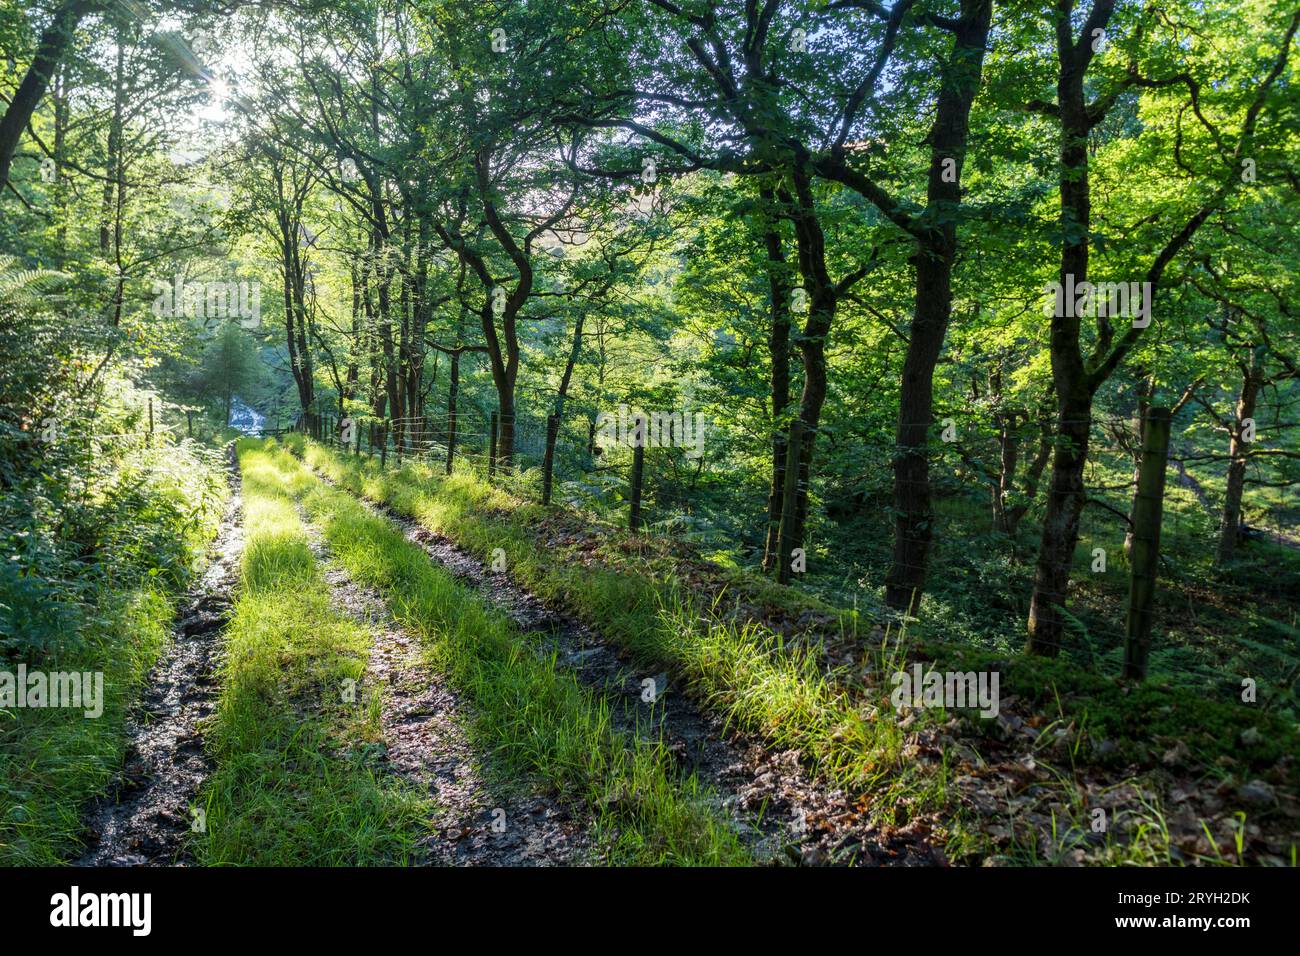 Track through Sessile oak (Quercus petraea) woodland in evening sunlight. Powys, Wales. July. Stock Photo